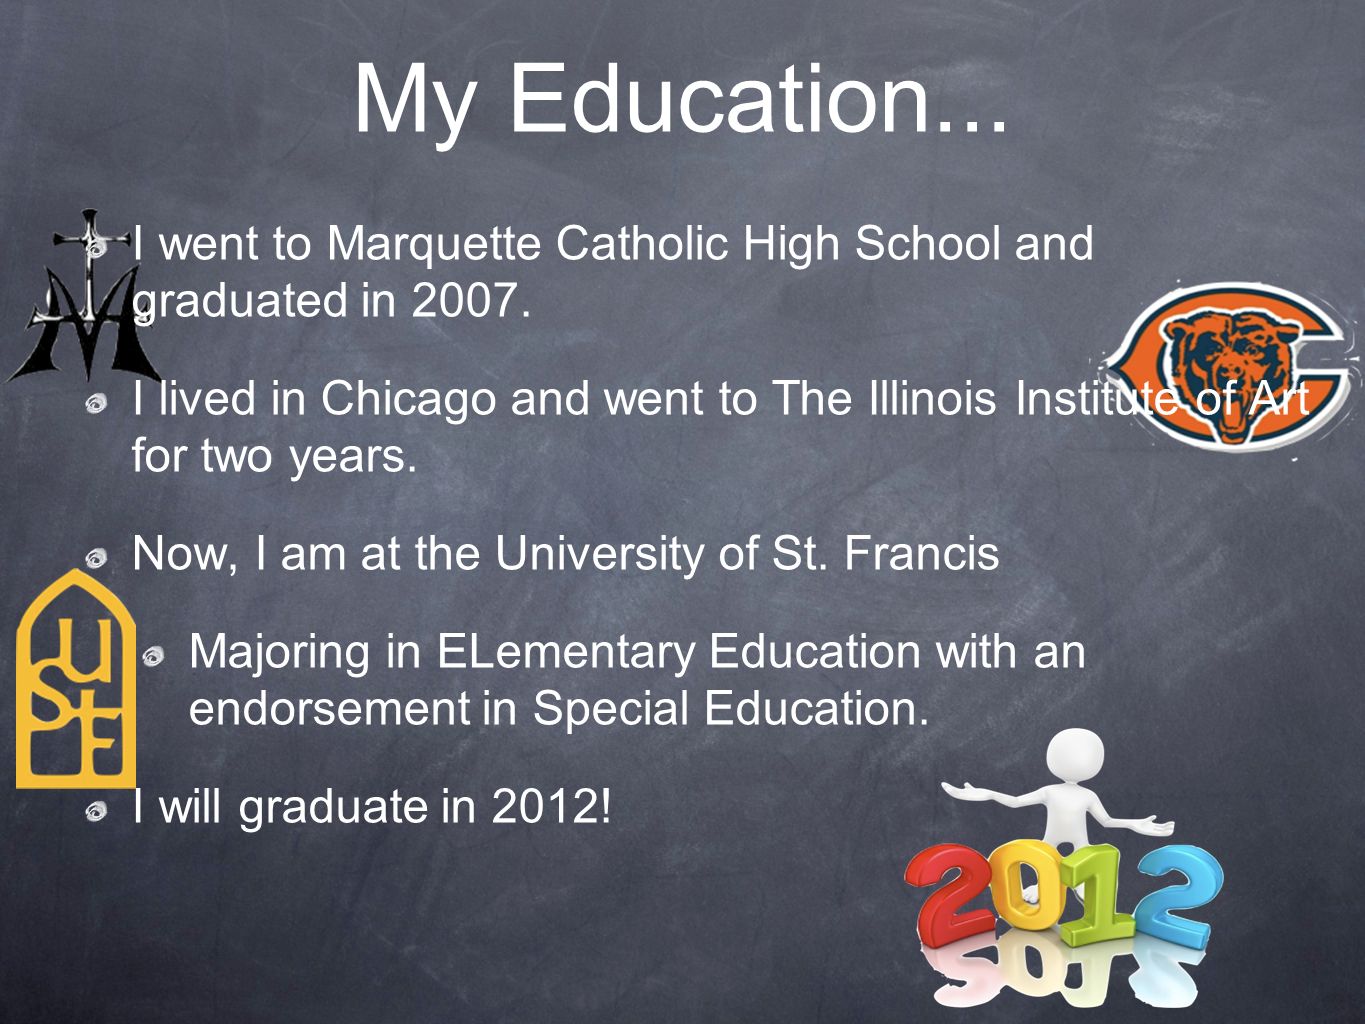 I went to Marquette Catholic High School and graduated in 2007.